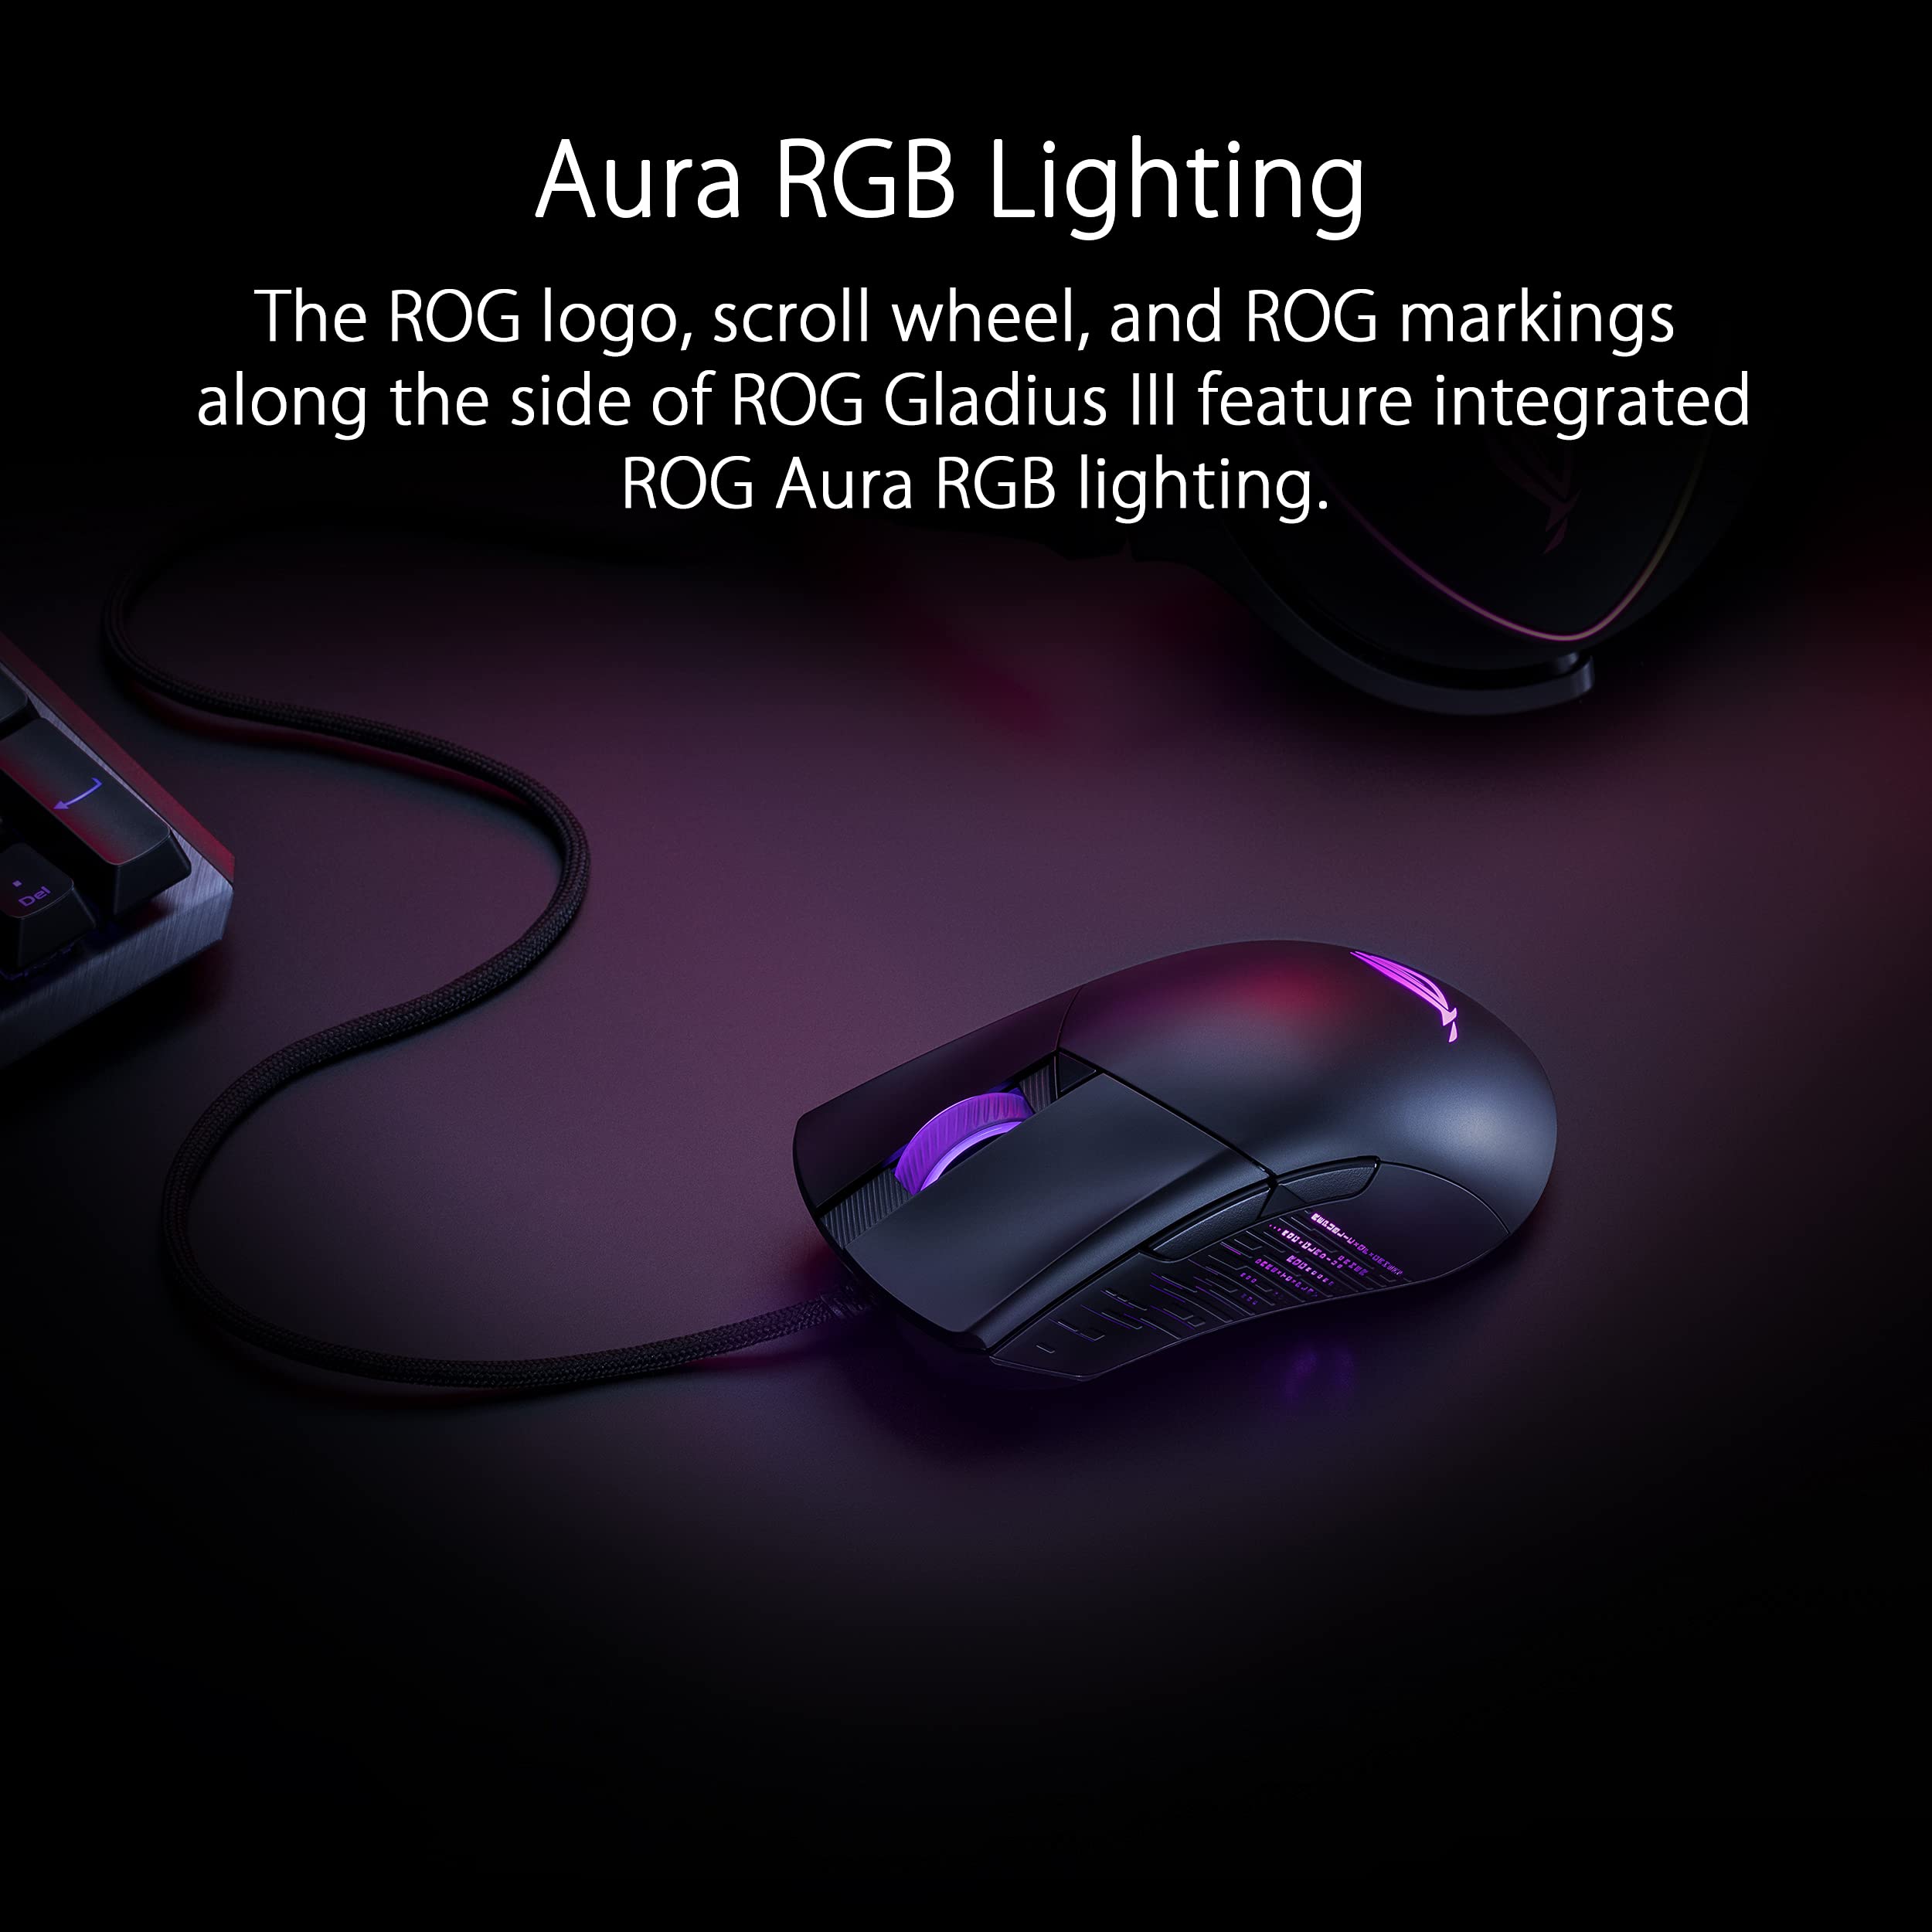 ASUS ROG Gladius III Wired Gaming Mouse | Tuned 19,000 DPI Sensor, Hot Swappable Push-Fit II Switches, Ergo Shape, ROG Omni Mouse Feet, ROG Paracord and Aura Sync RGB Lighting